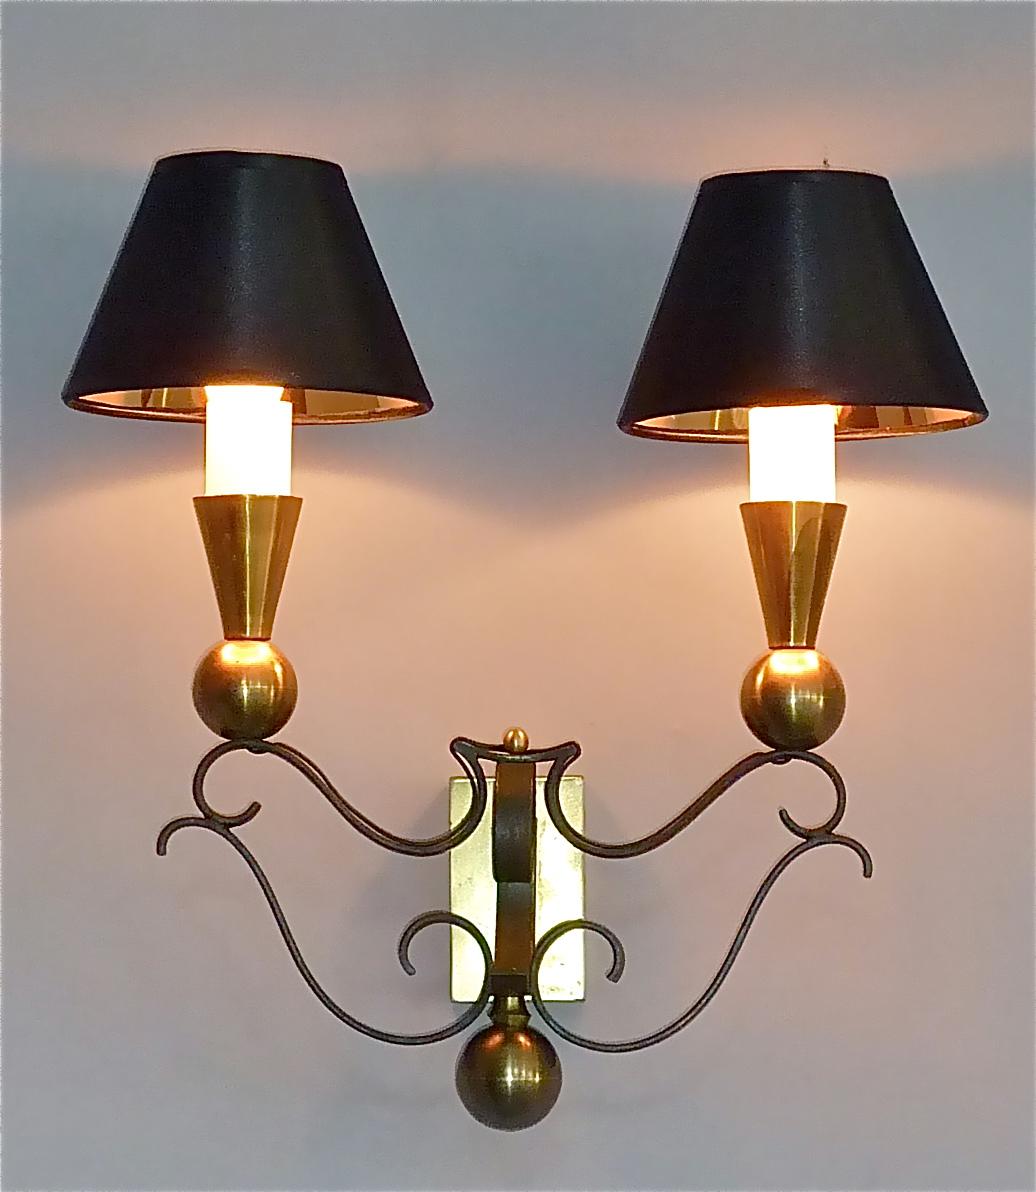 3 Rare Sconces Poillerat Adnet Style Black Forged Iron Brass Gold France 1950s For Sale 11